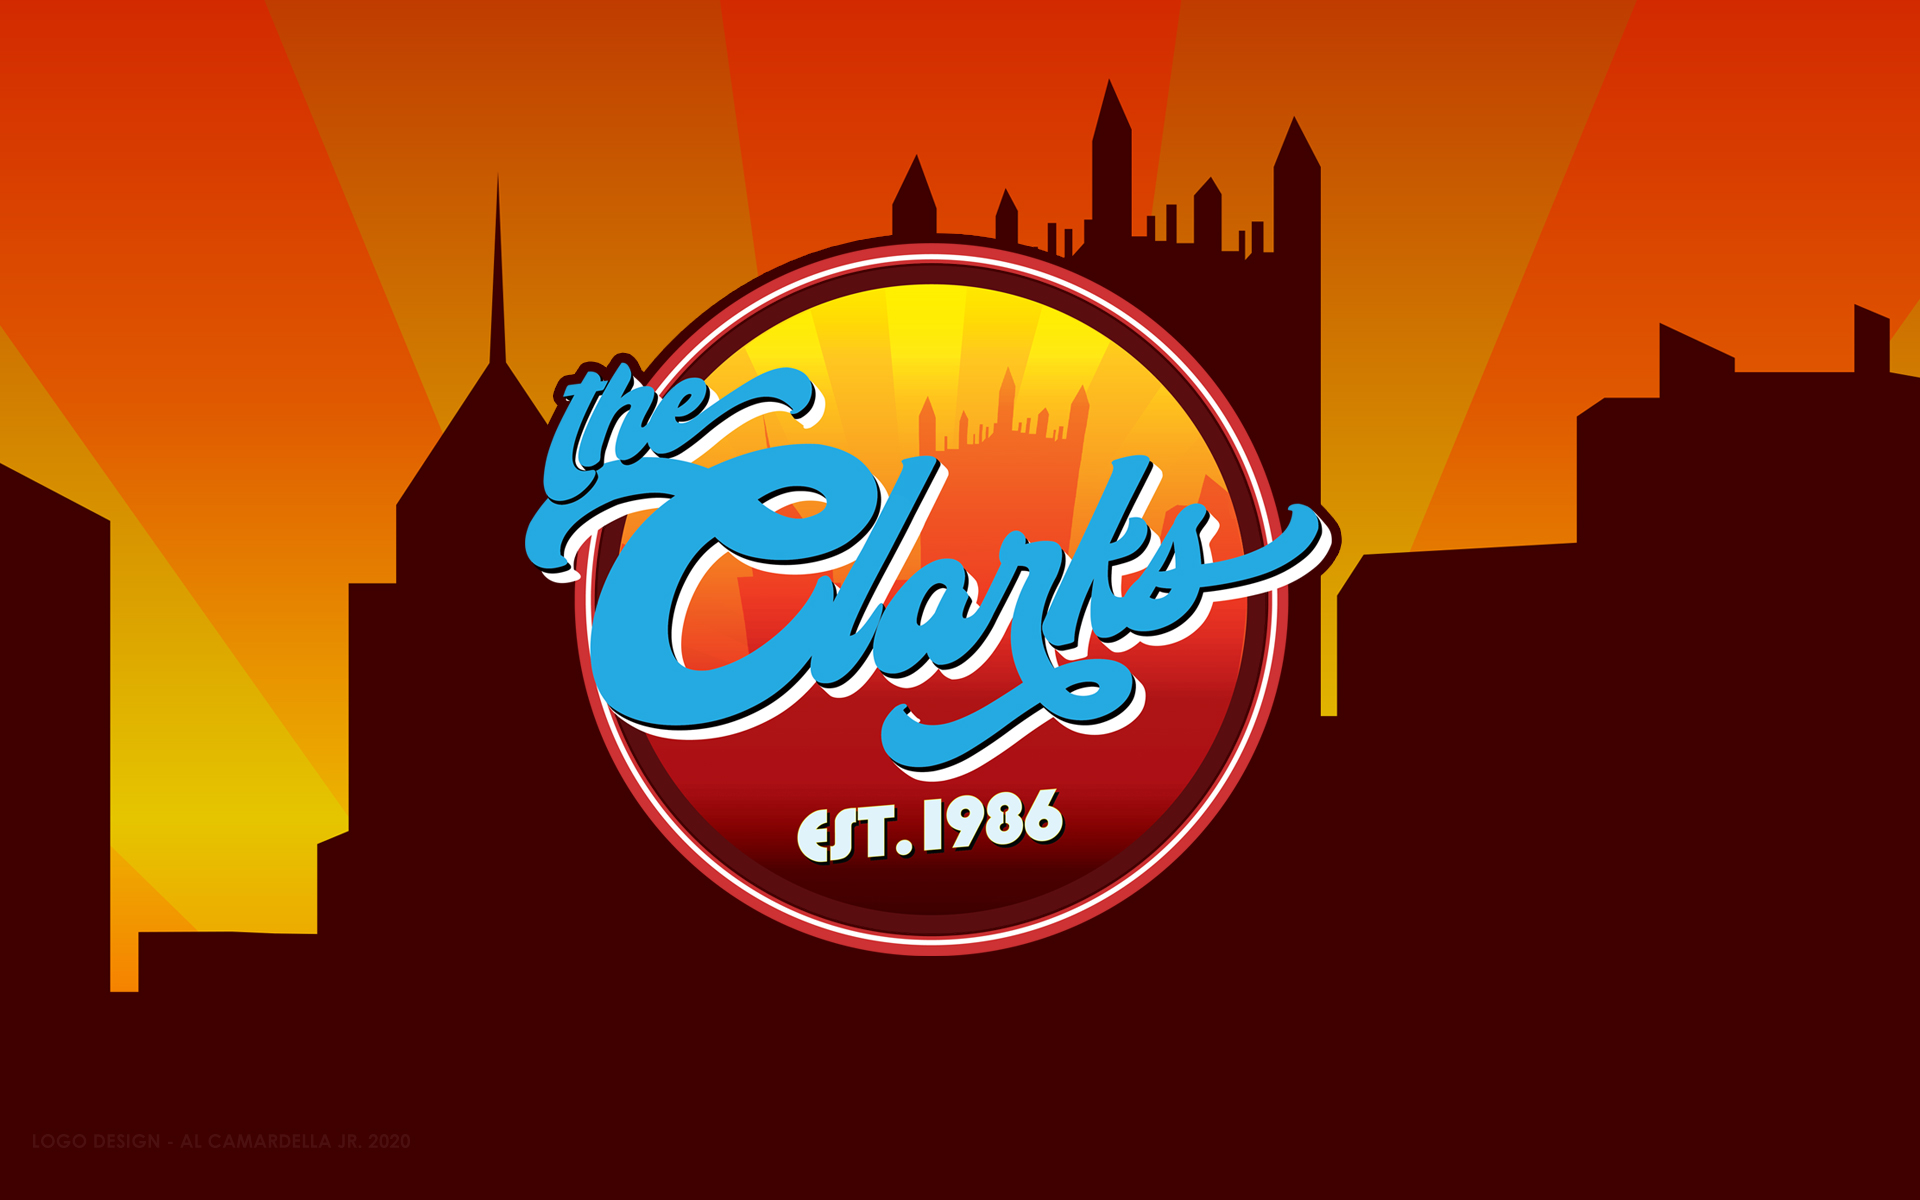 The Clarks Online The Official Site of The Clarks